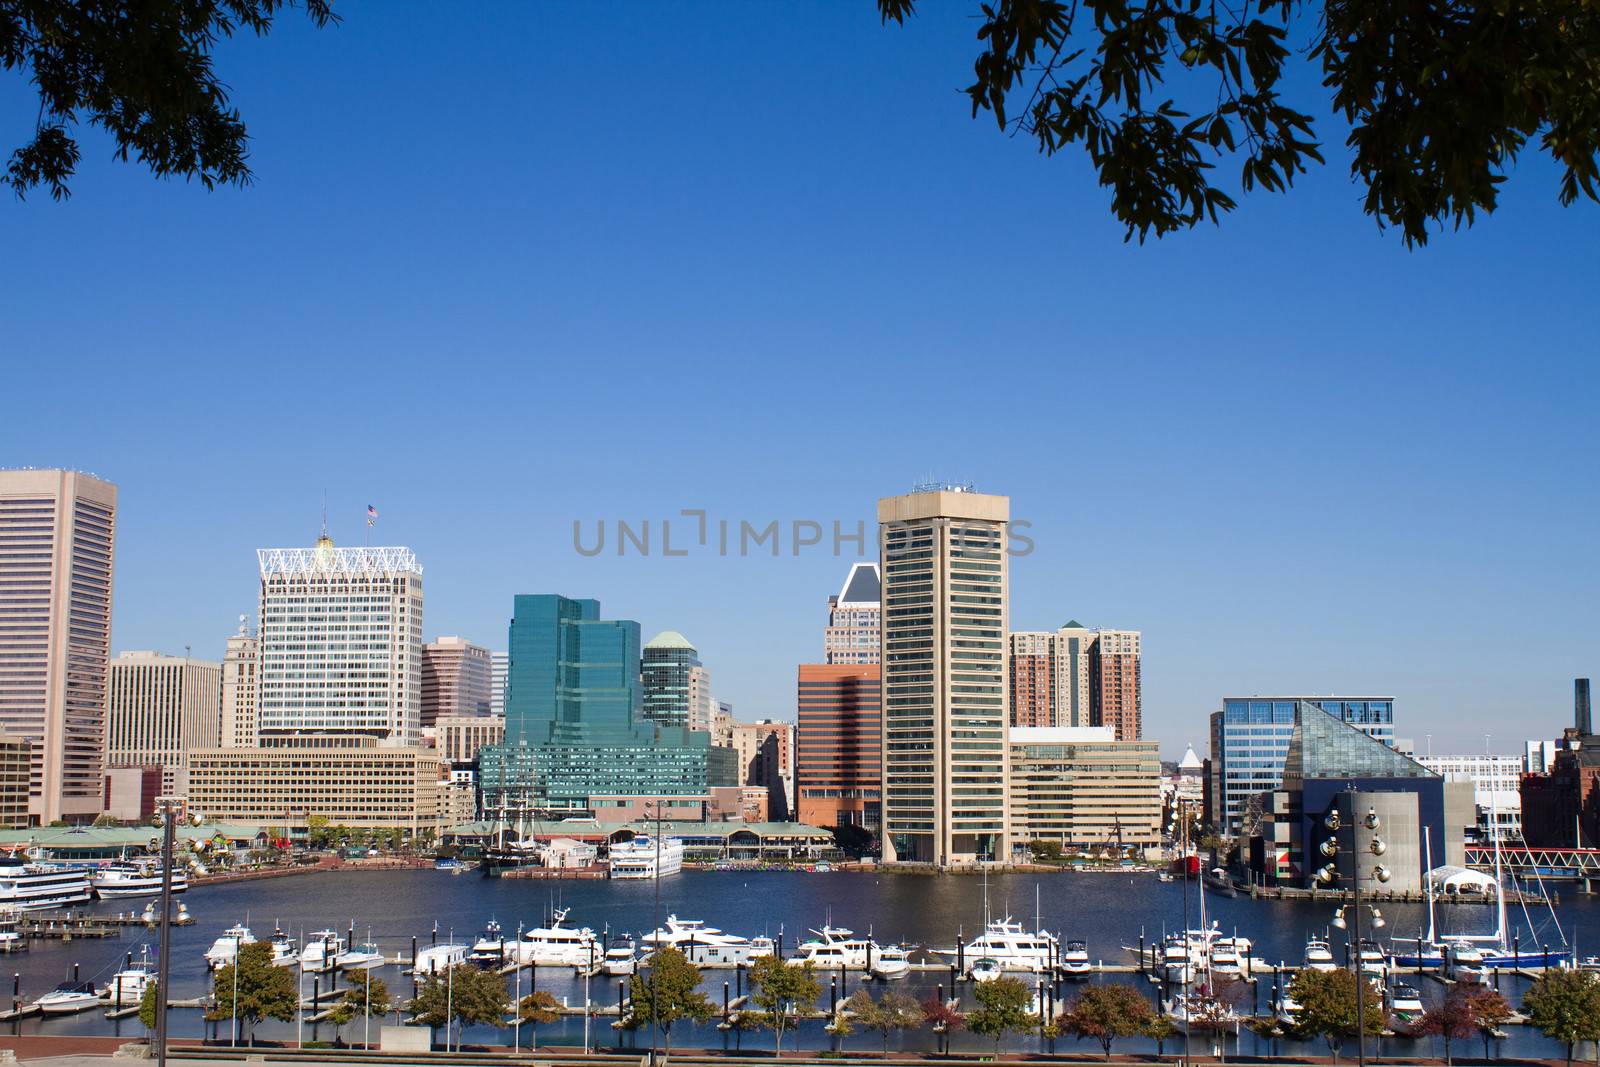 Skyline of Baltimore city downtown area with the Inner Harbor and yacht basin.